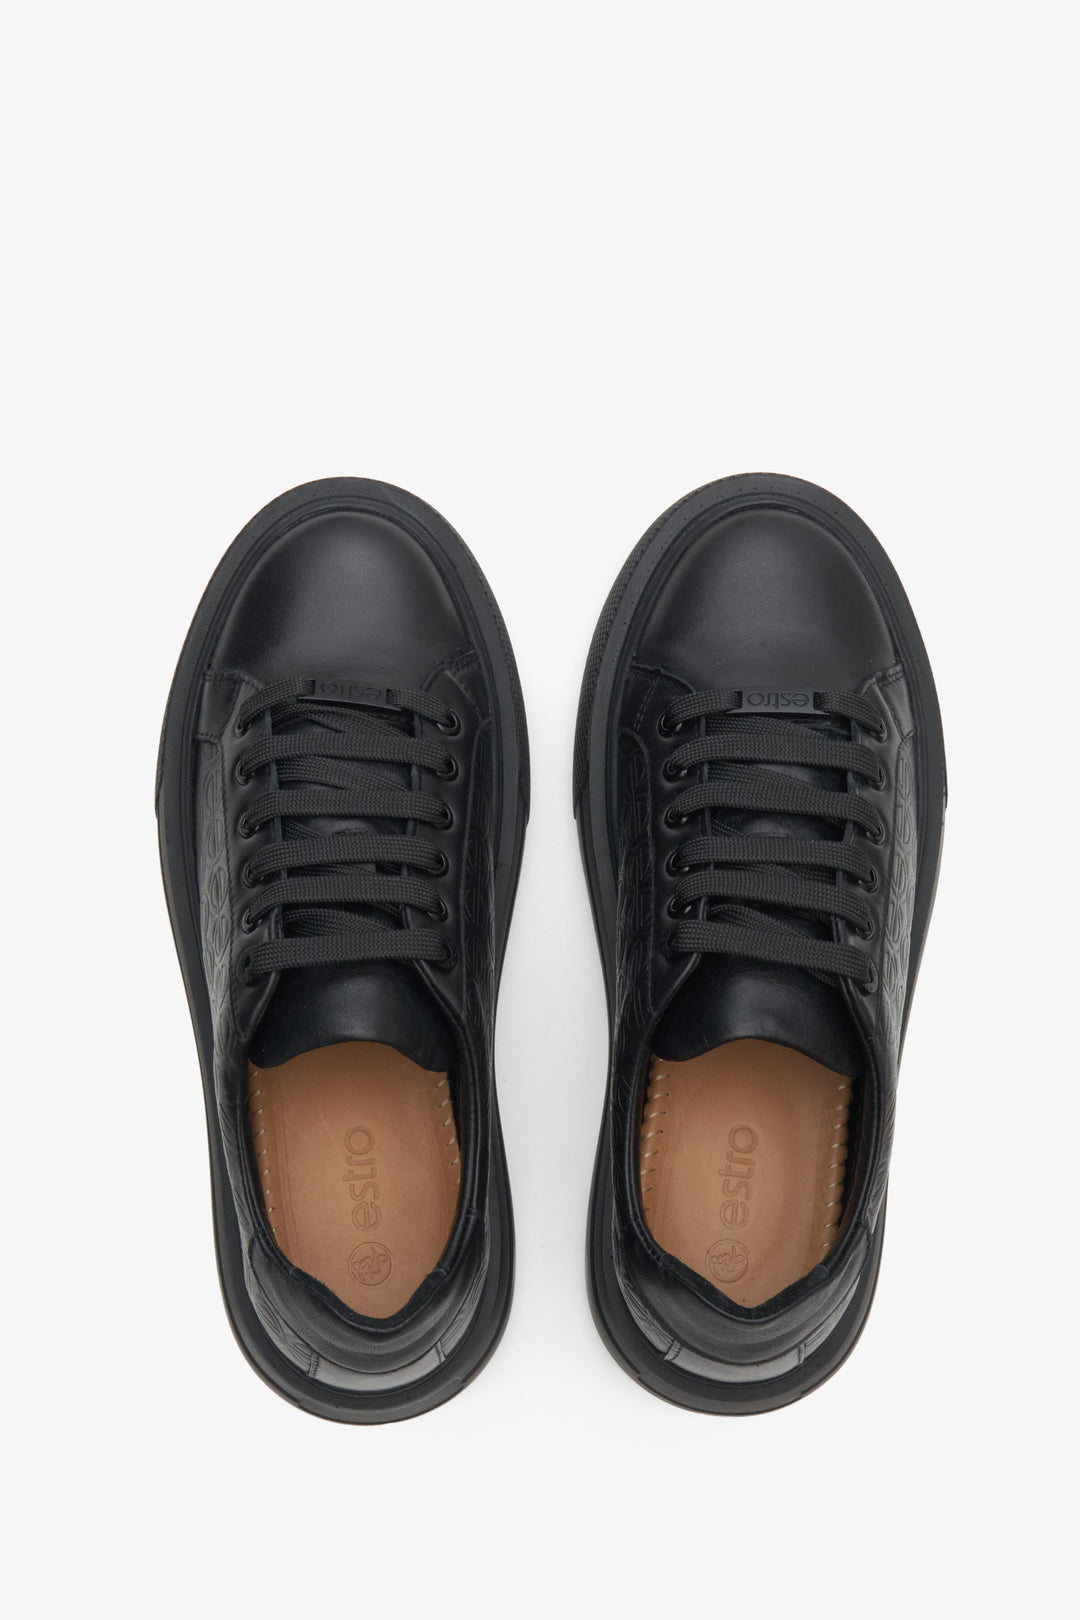 Women's black sneakers with a thick sole by Estro made of genuine leather - top view presentation of the model.